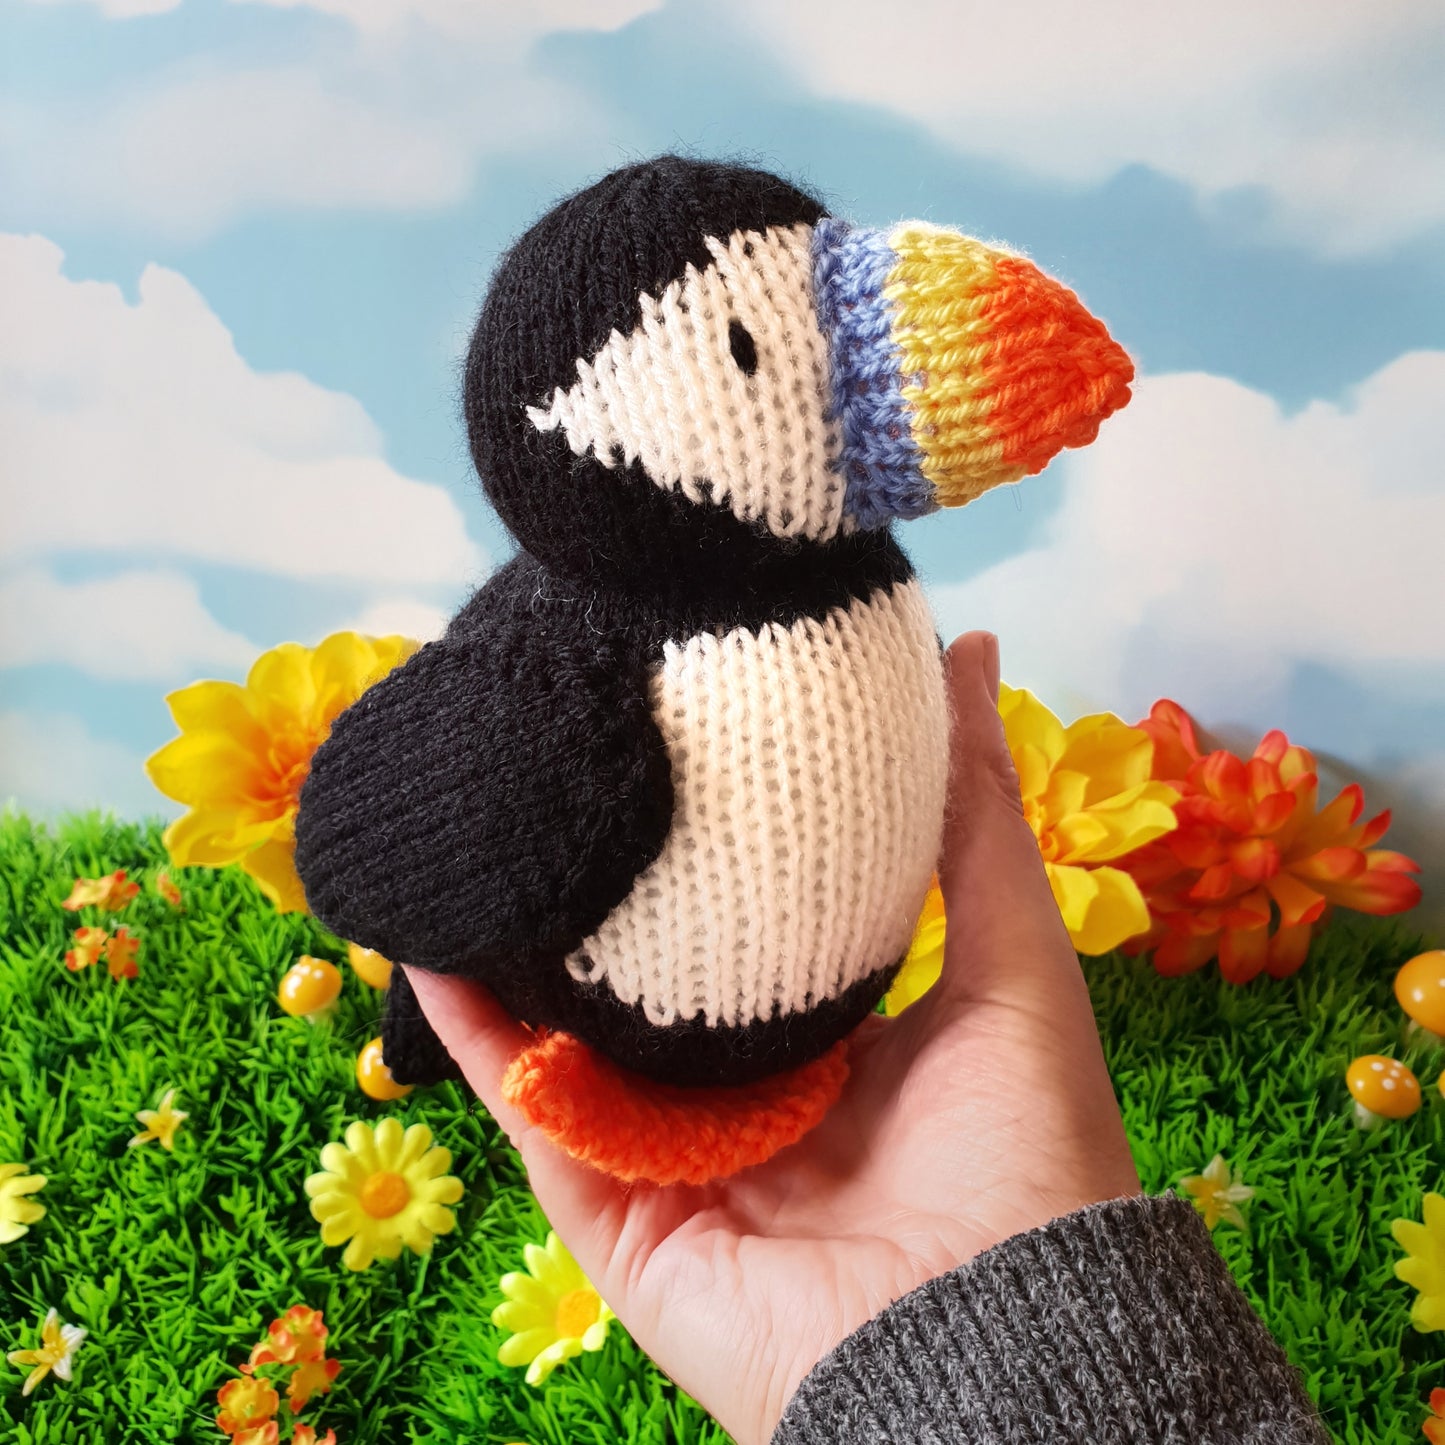 a knitted puffin being held in a hand with flowers in the background